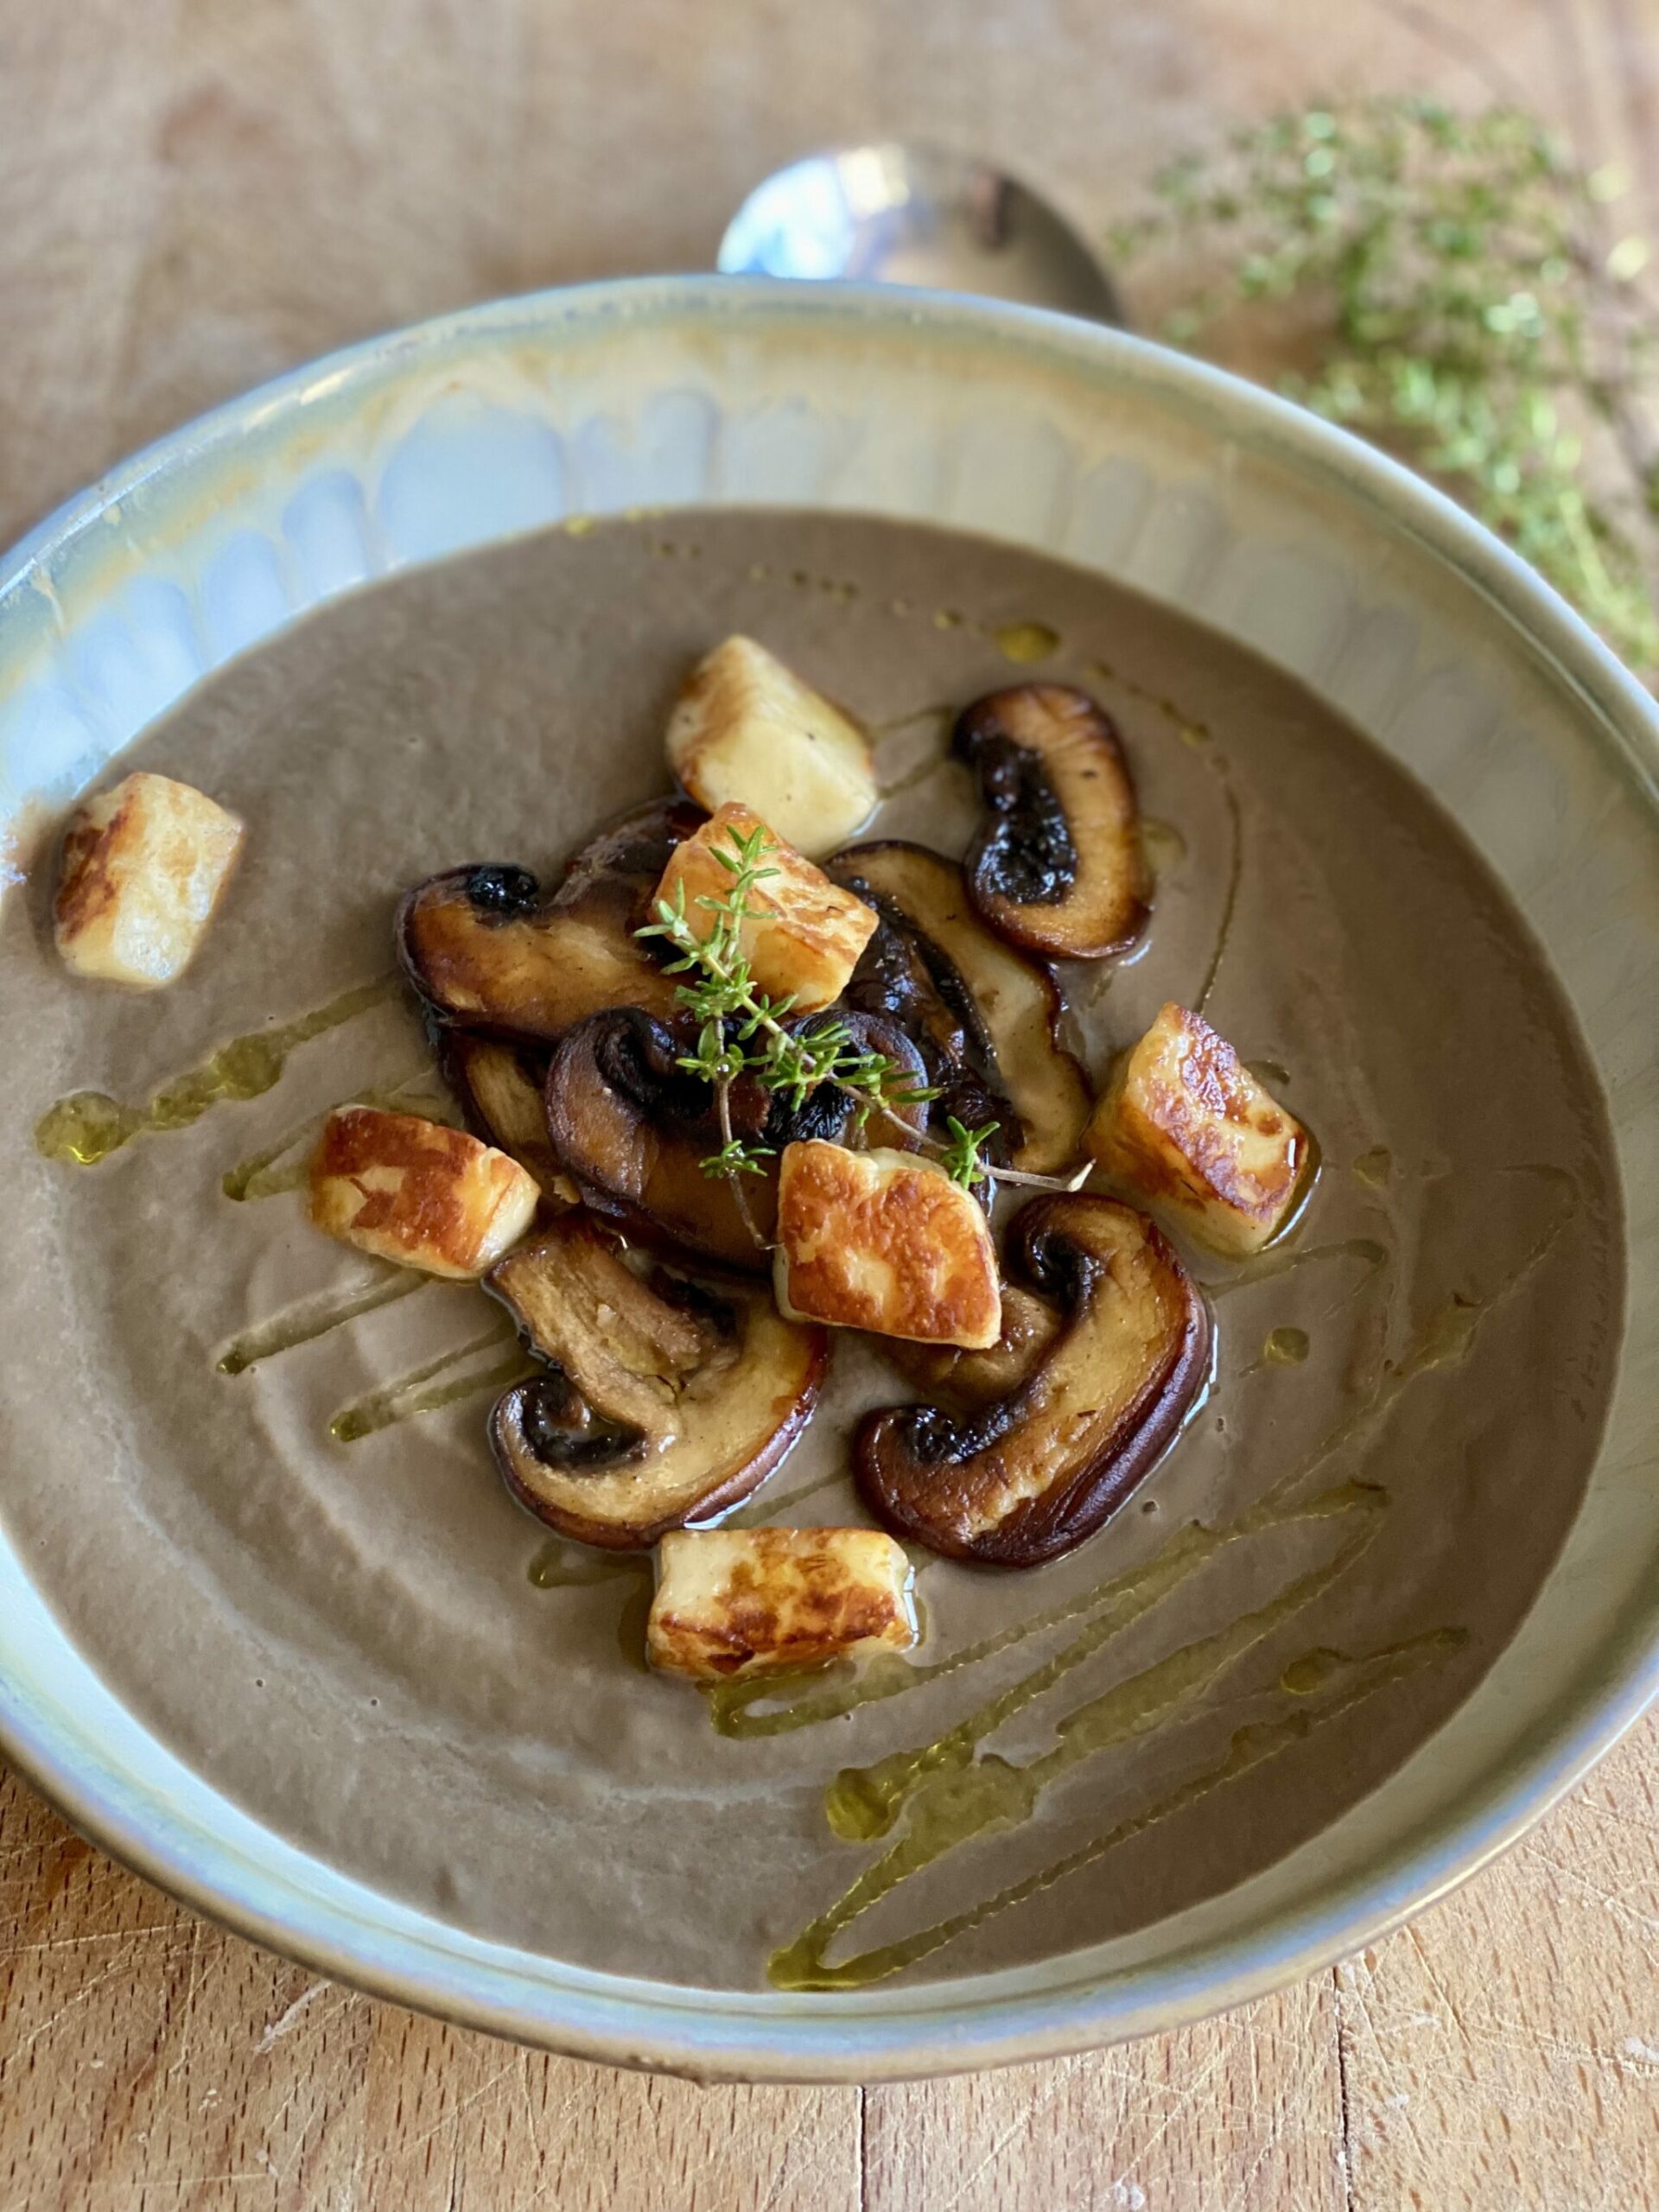 Velvety Mushroom Soup with Halloumi Croutons